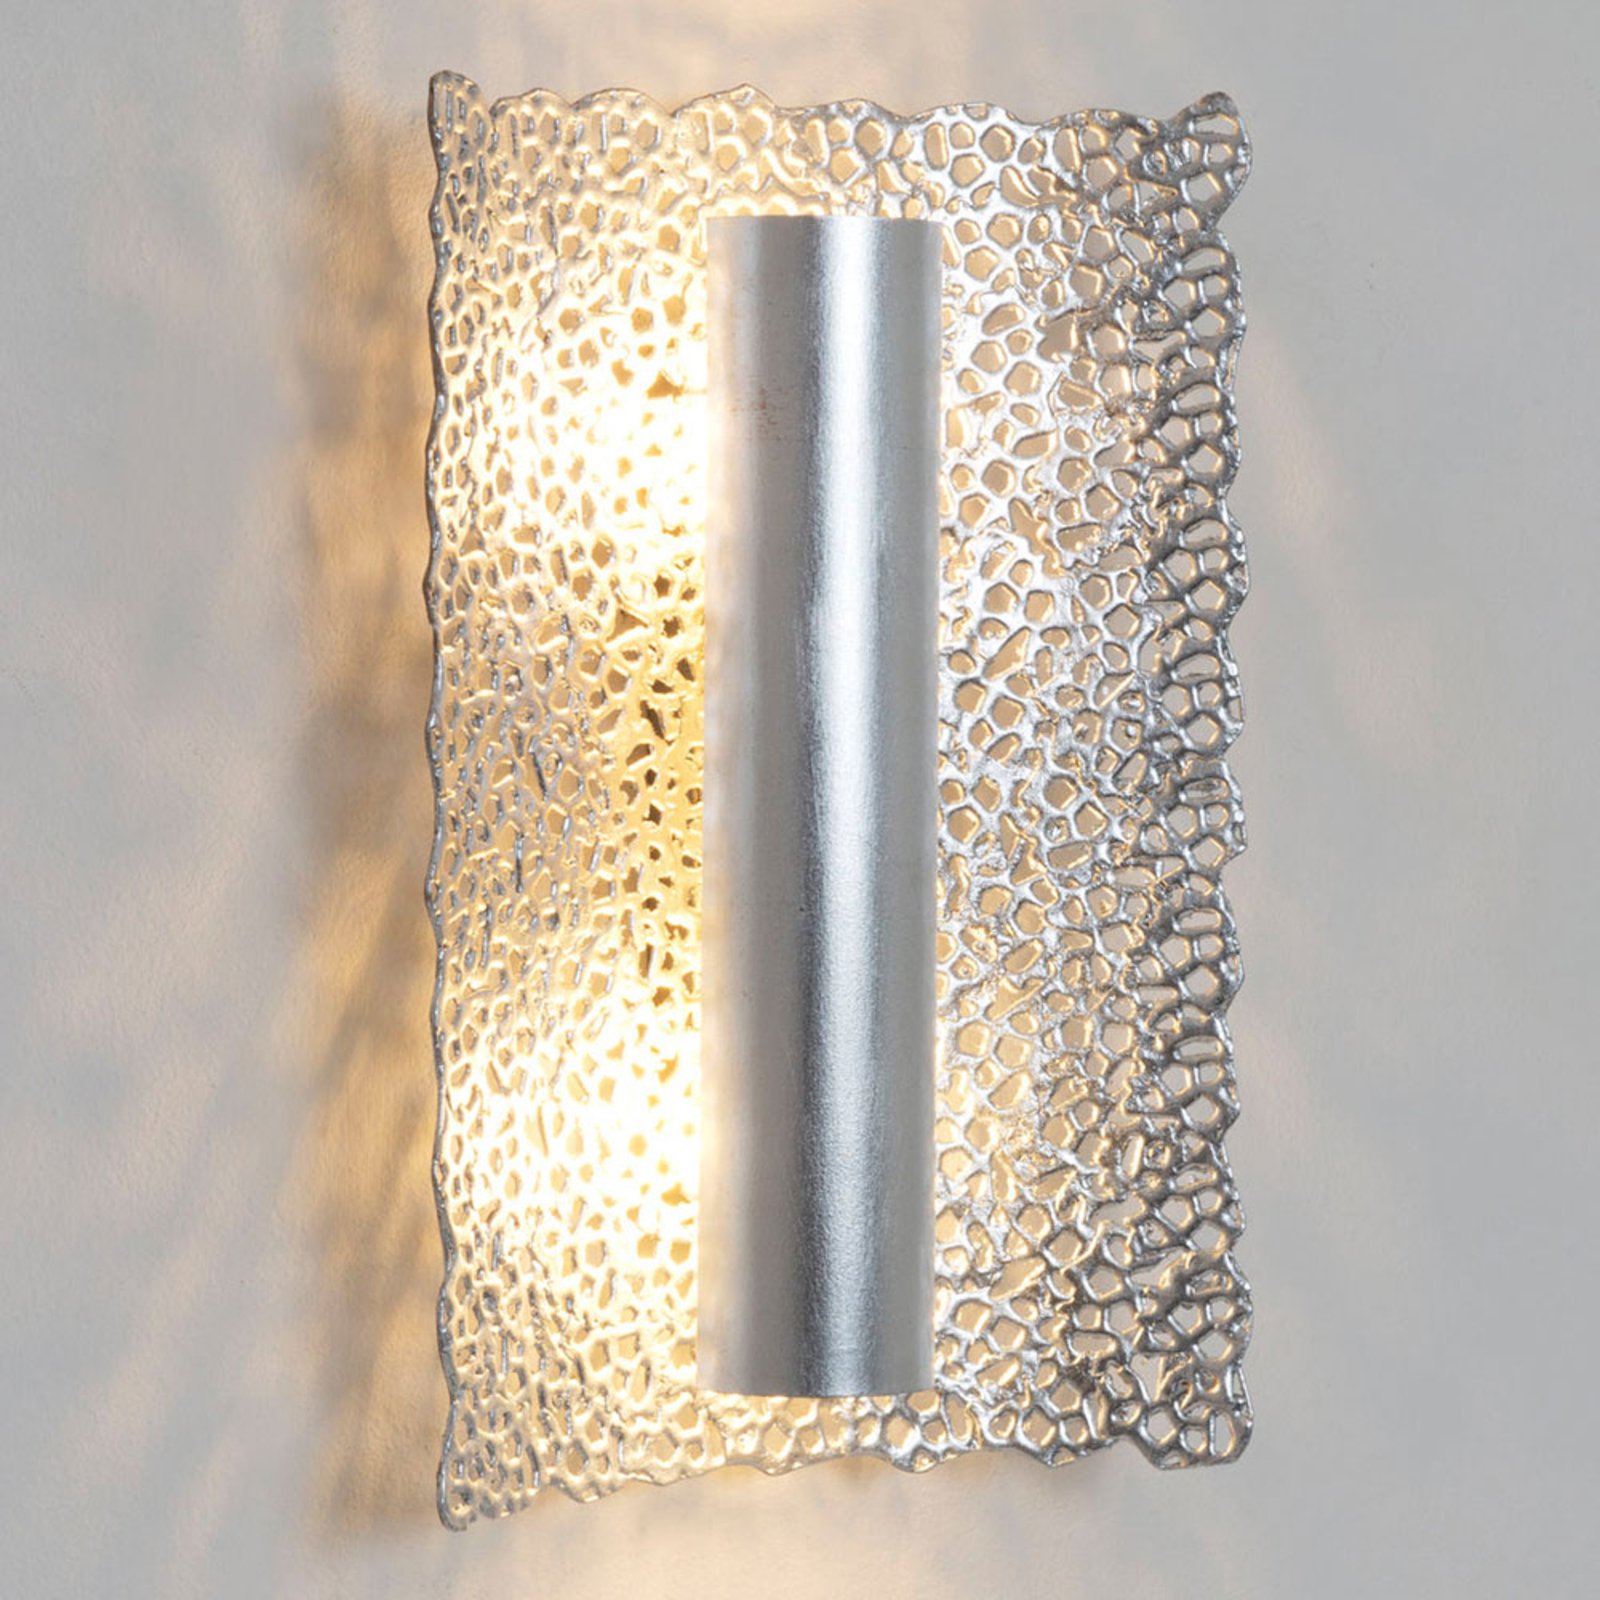 Utopistico wall light in silver and chrome